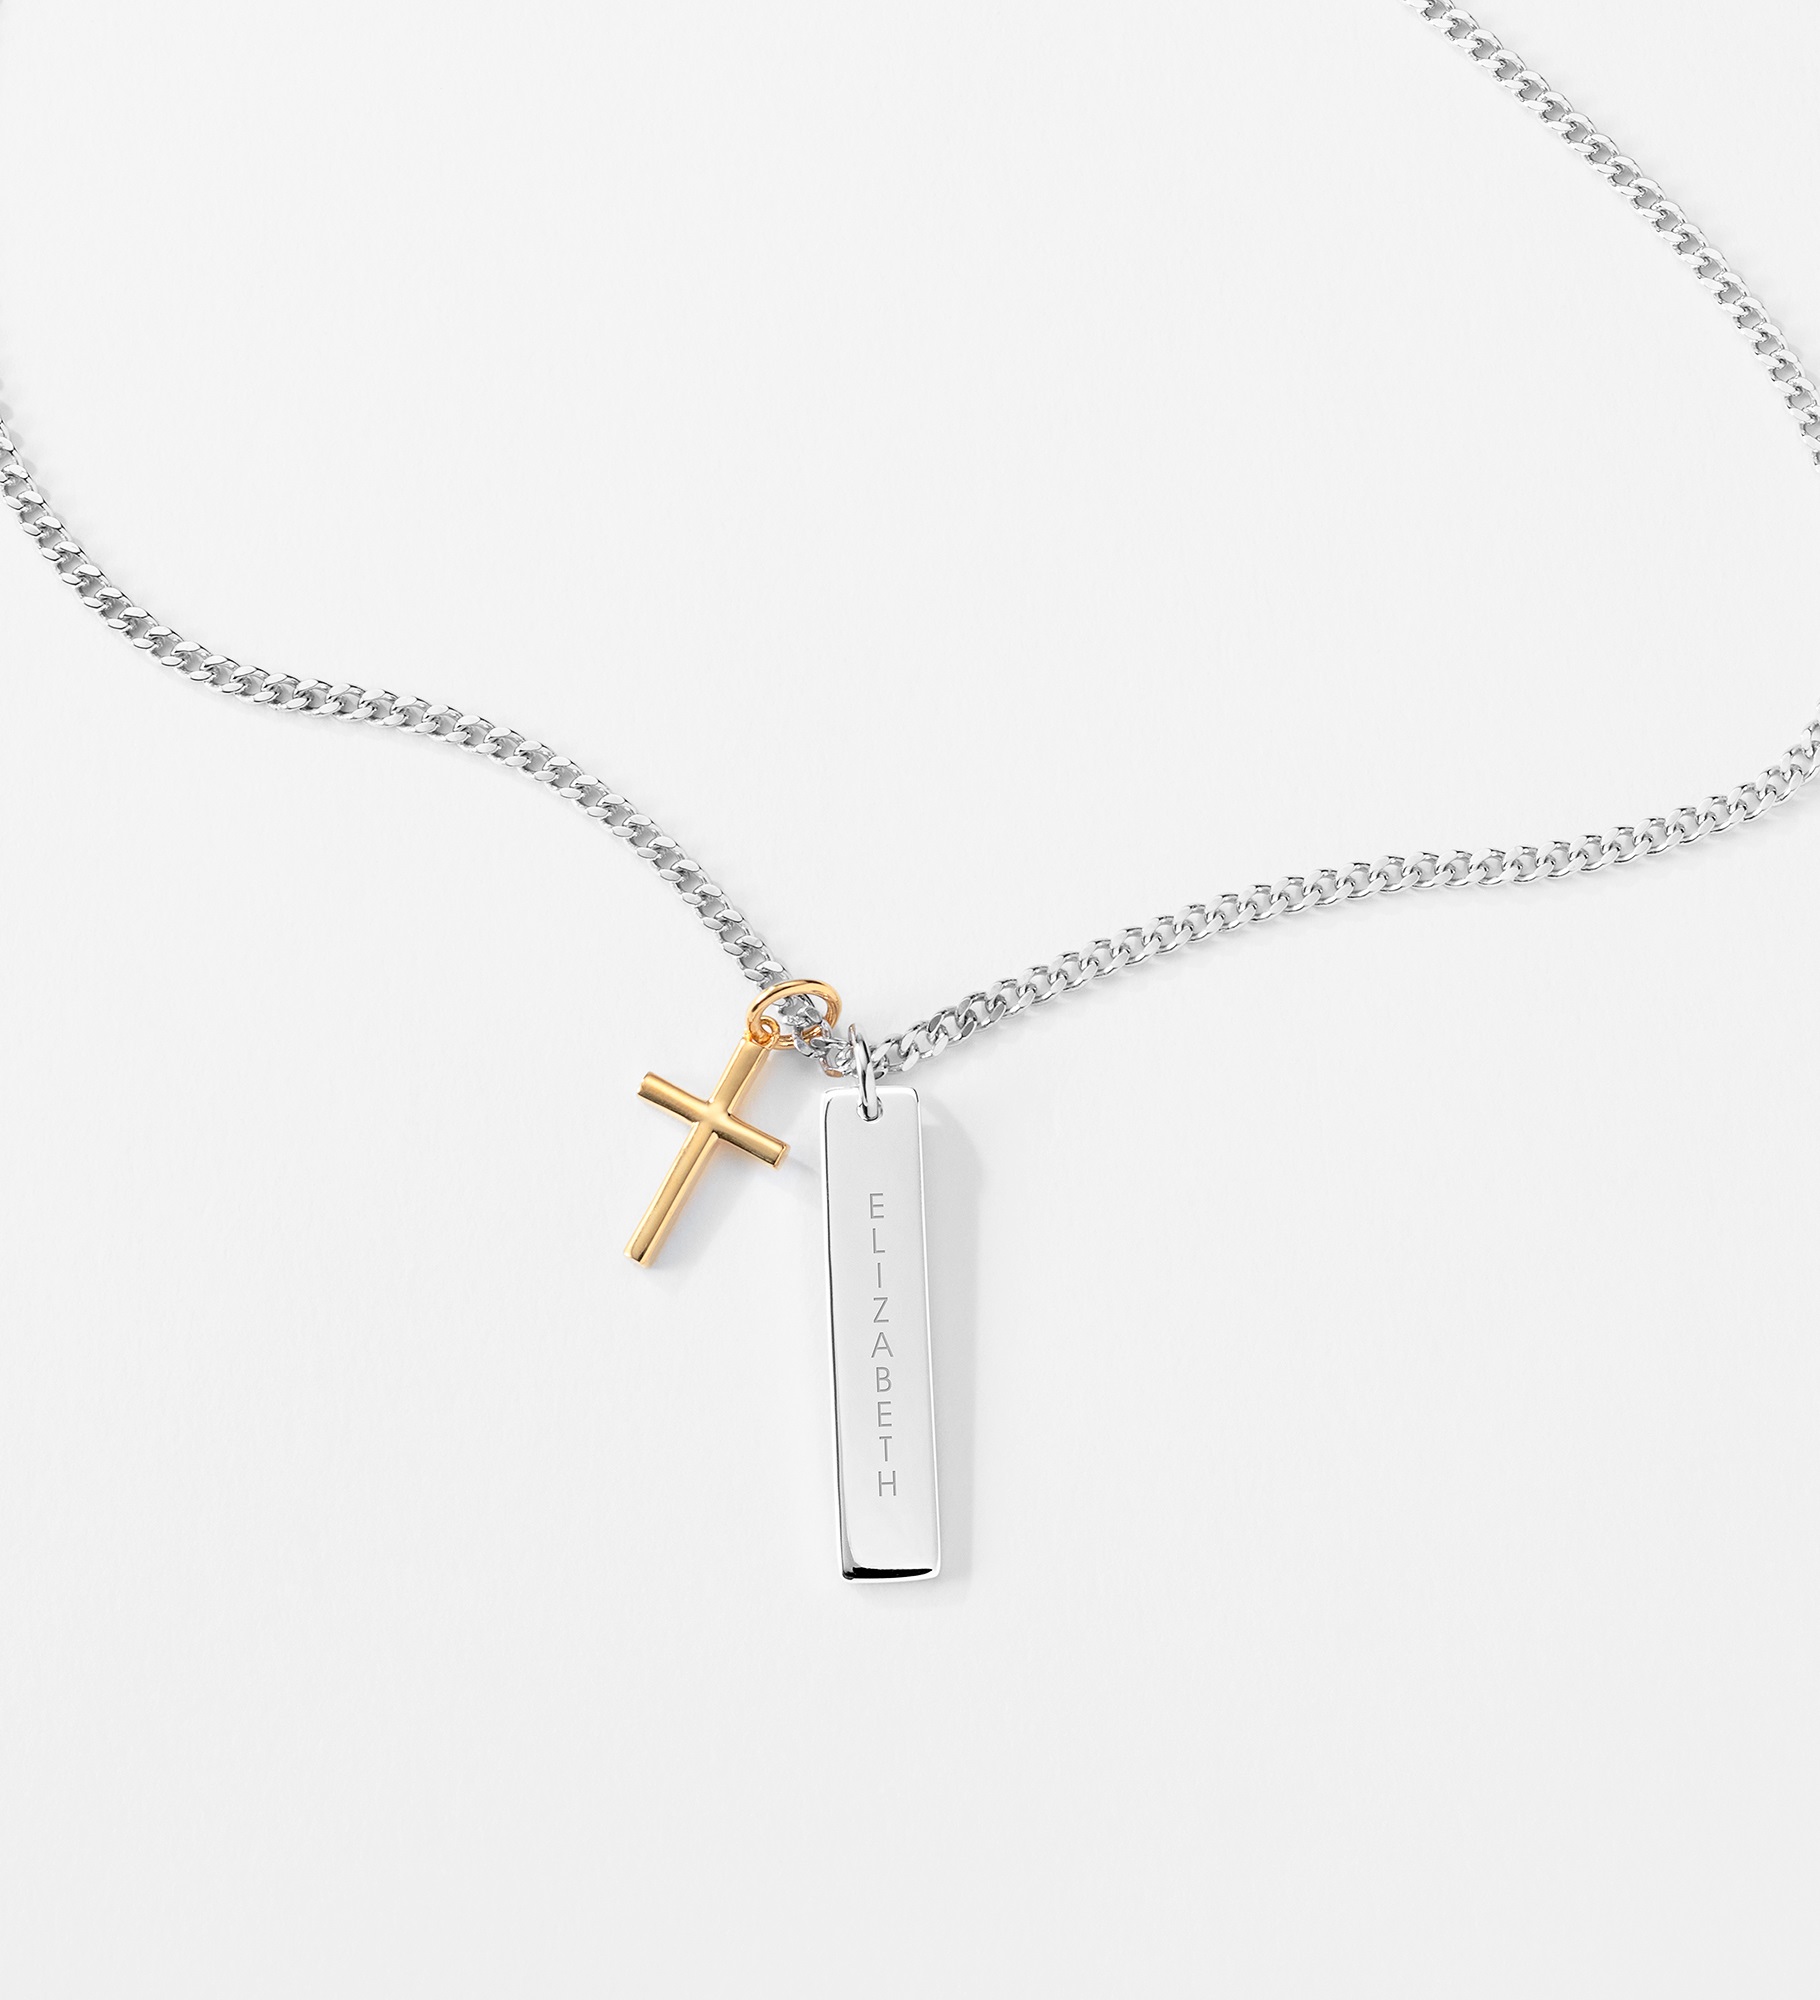 Engraved Gold & Sterling Silver Cross and Bar Necklace